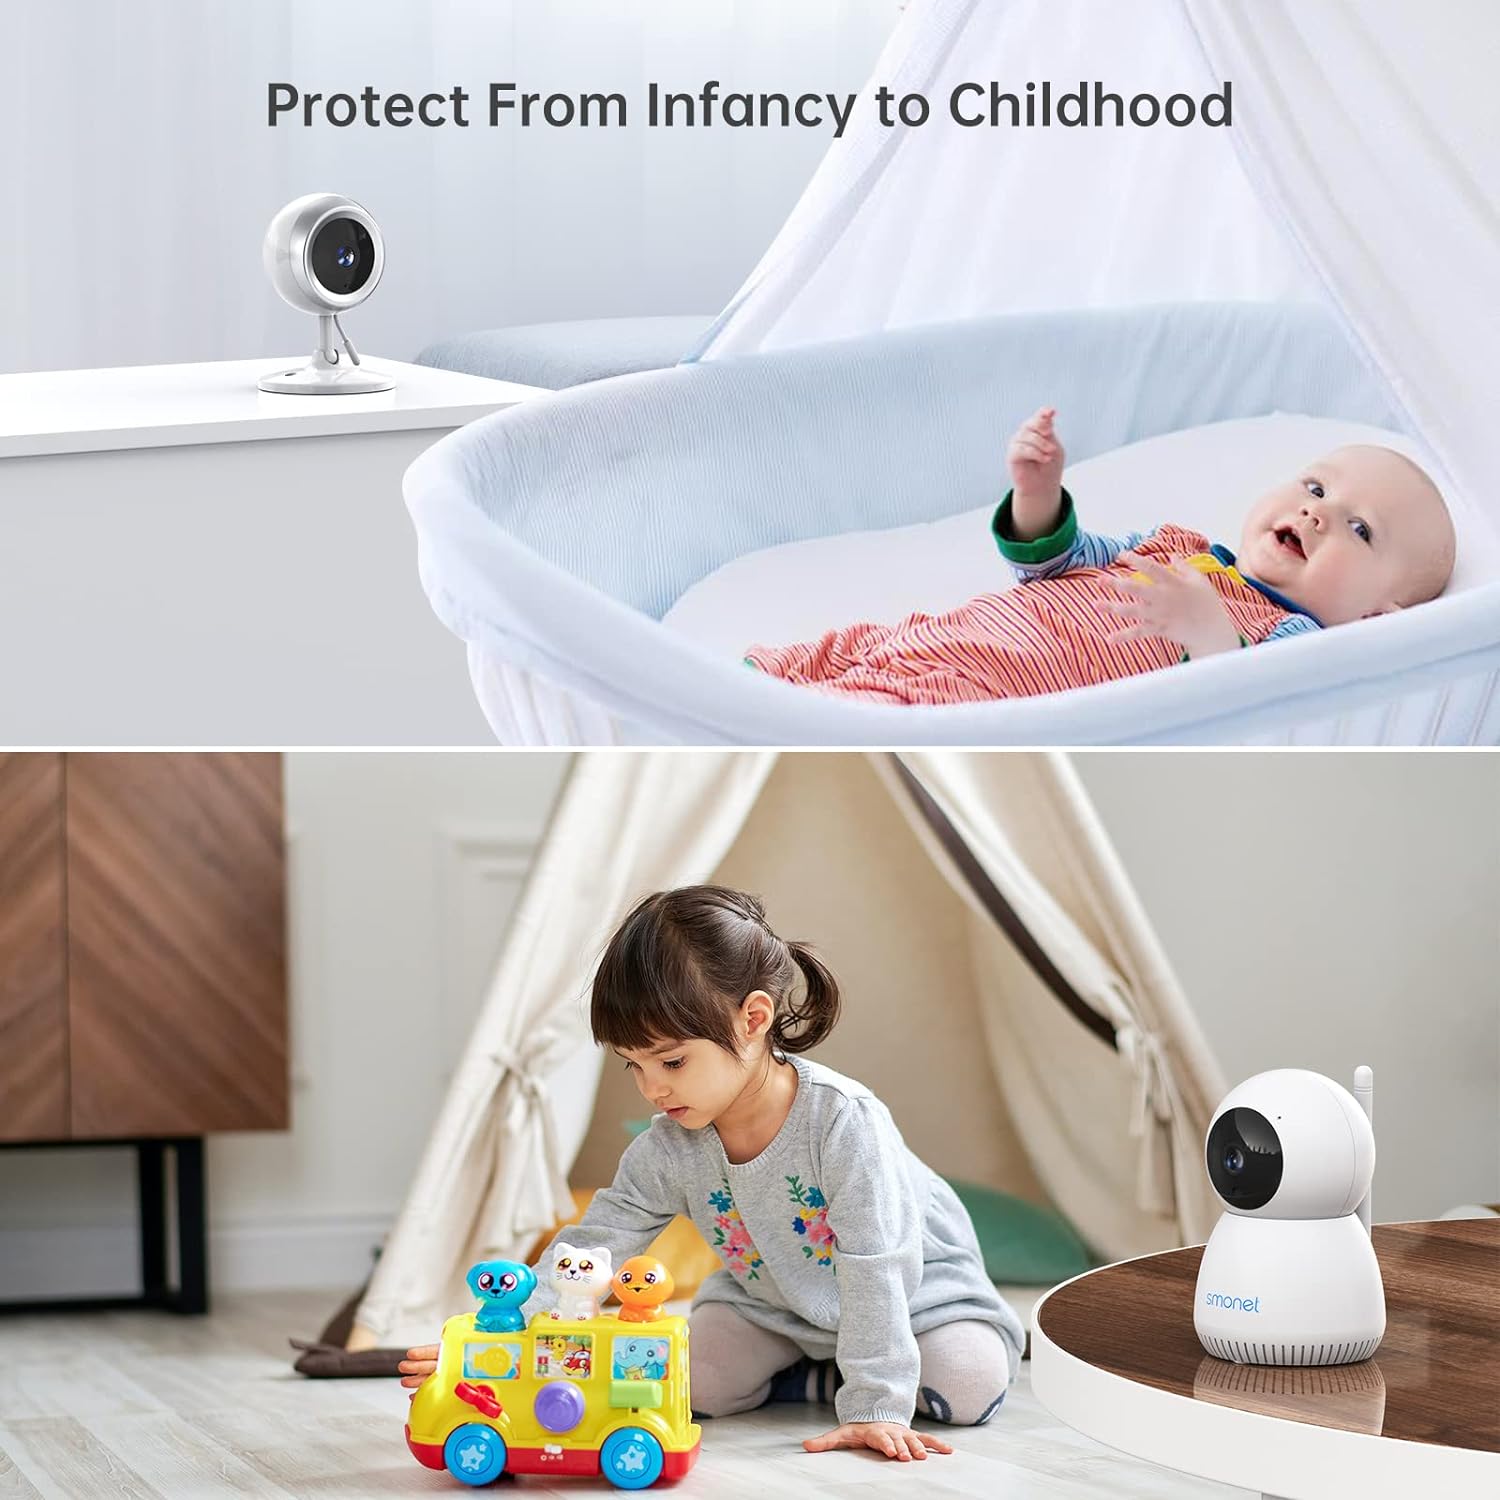 Baby Monitor with Video and Audio,SMONET 1080P Baby Monitor with 2 Cameras Remote Pan Tilt Feed Alarm Two-Way Talk Night Vision Crying Alarm